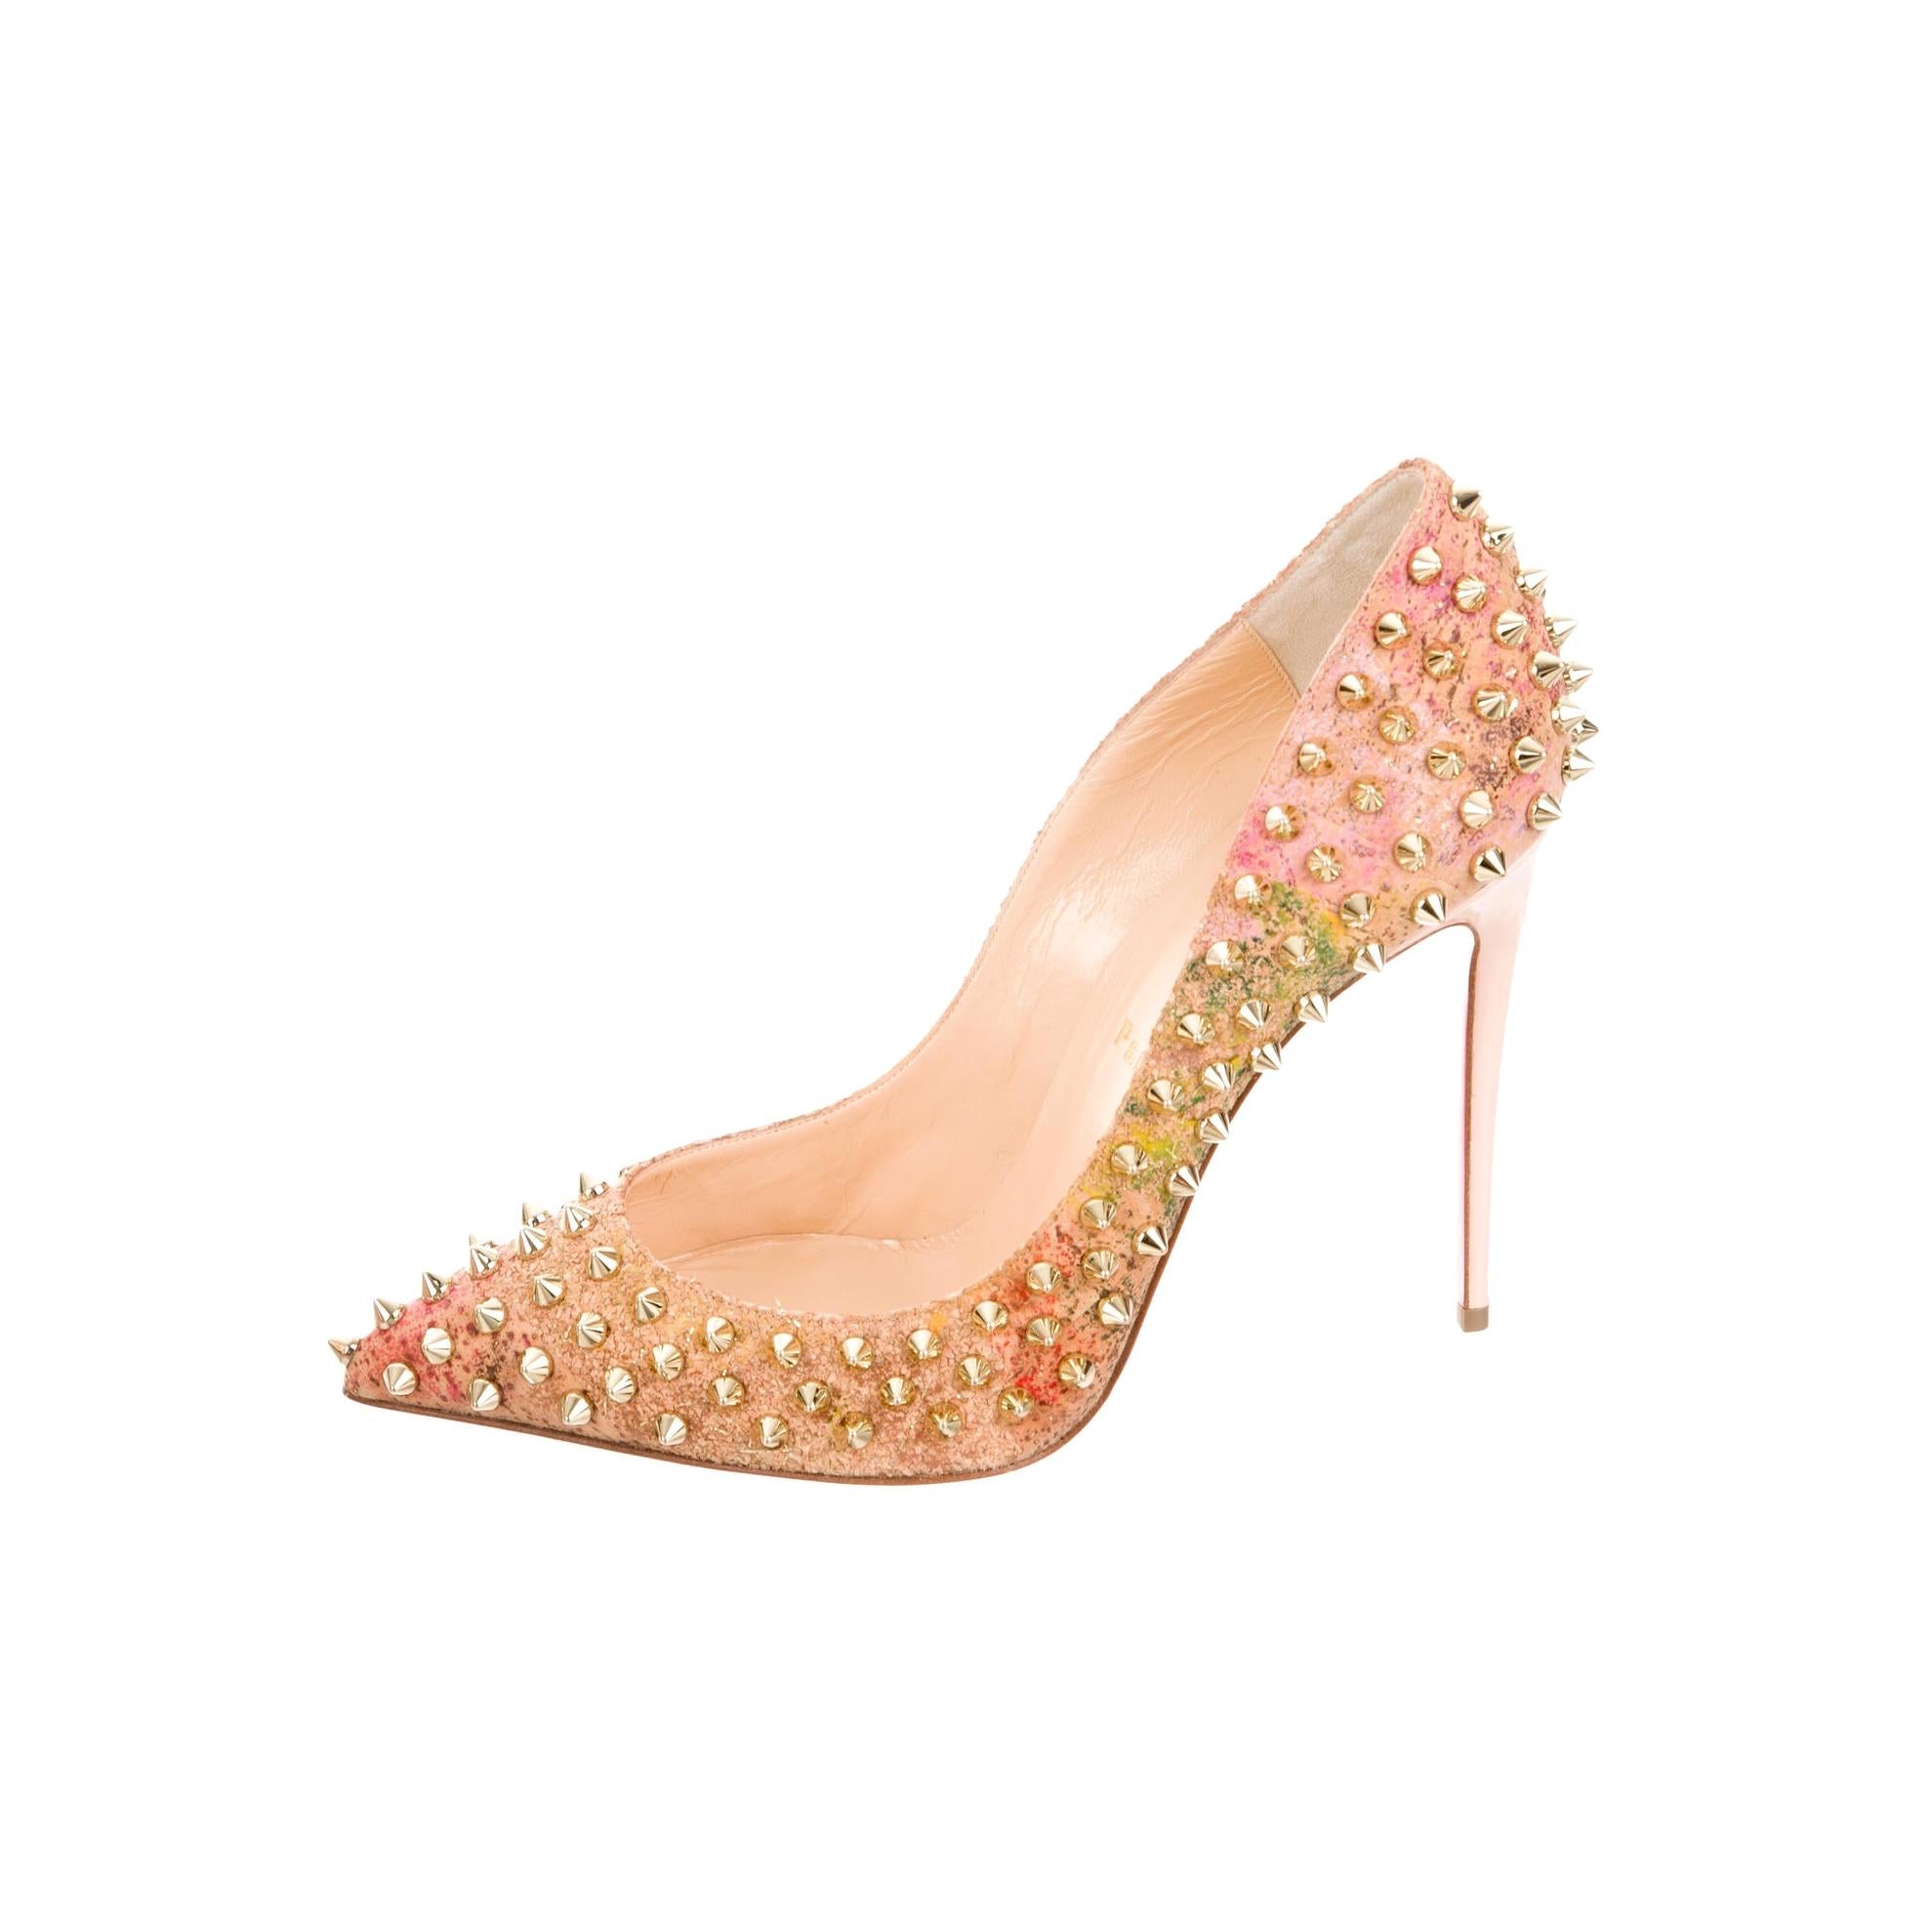 Christian Louboutin NEW Multi Color Cork Gold Stud Evening Heels Pumps in Box